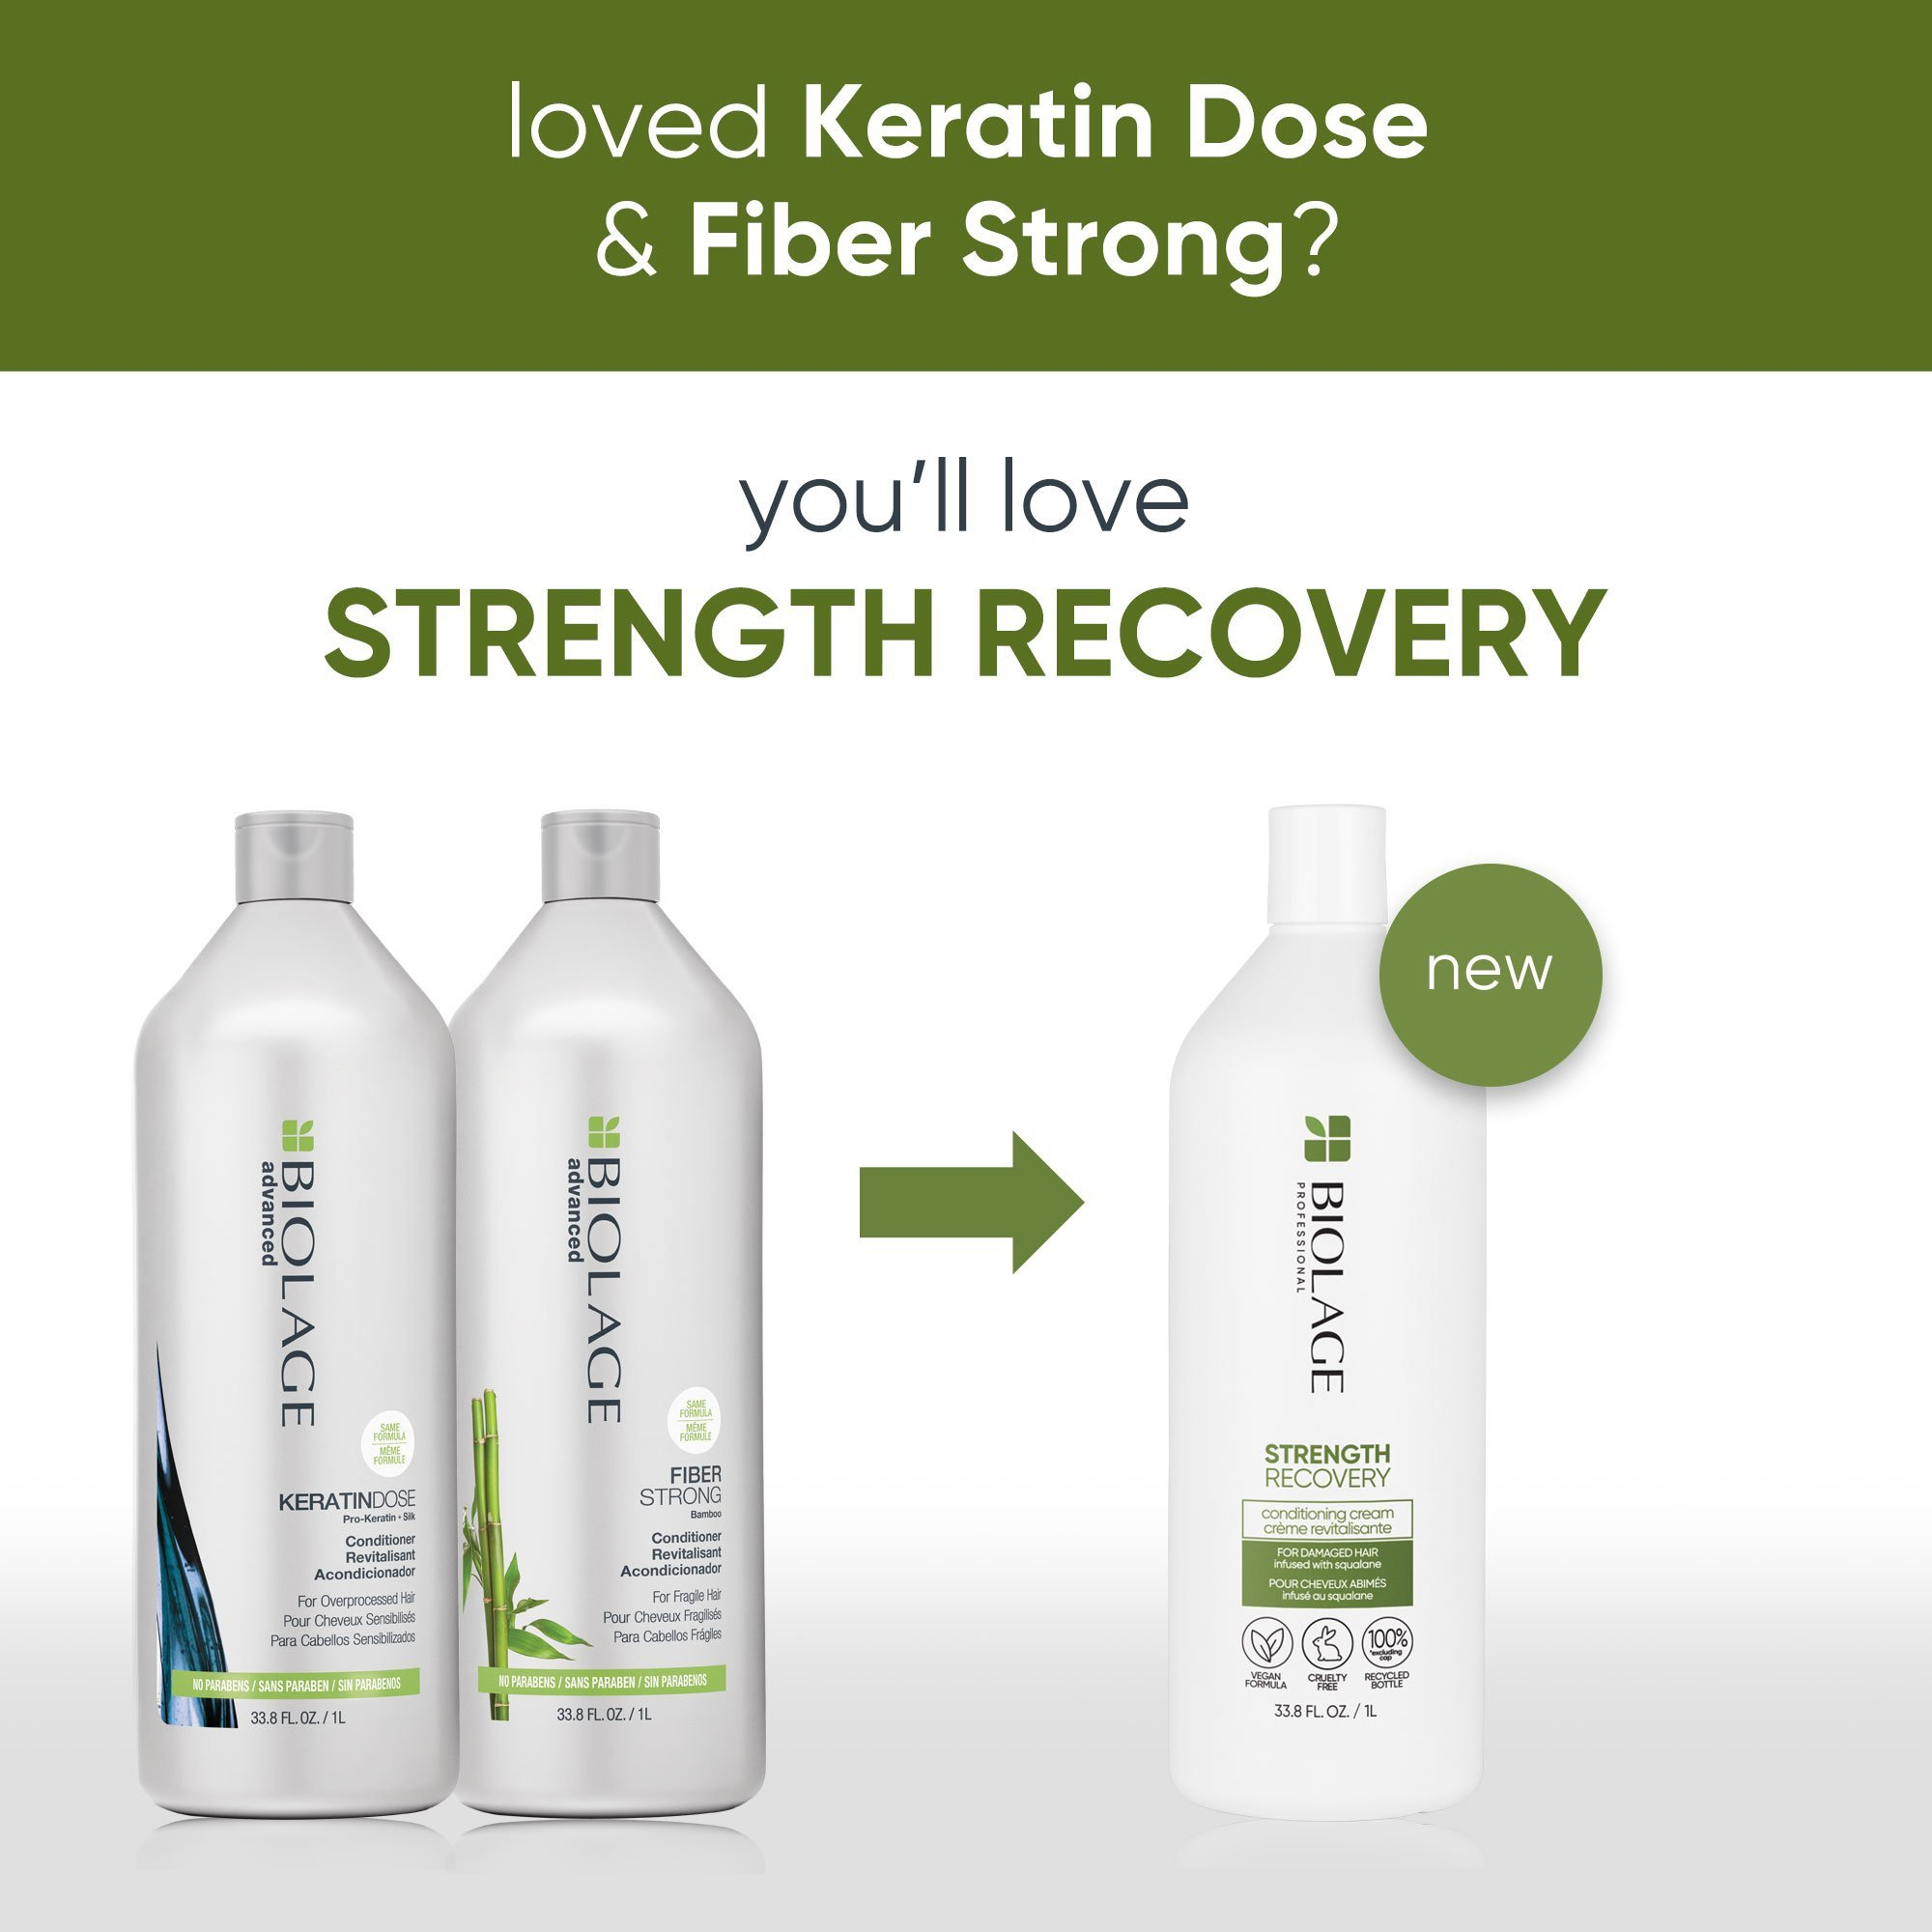 Matrix Biolage Strength Recovery Shampoo and Conditioner Liter Duo ($76 Value) / 33OZ